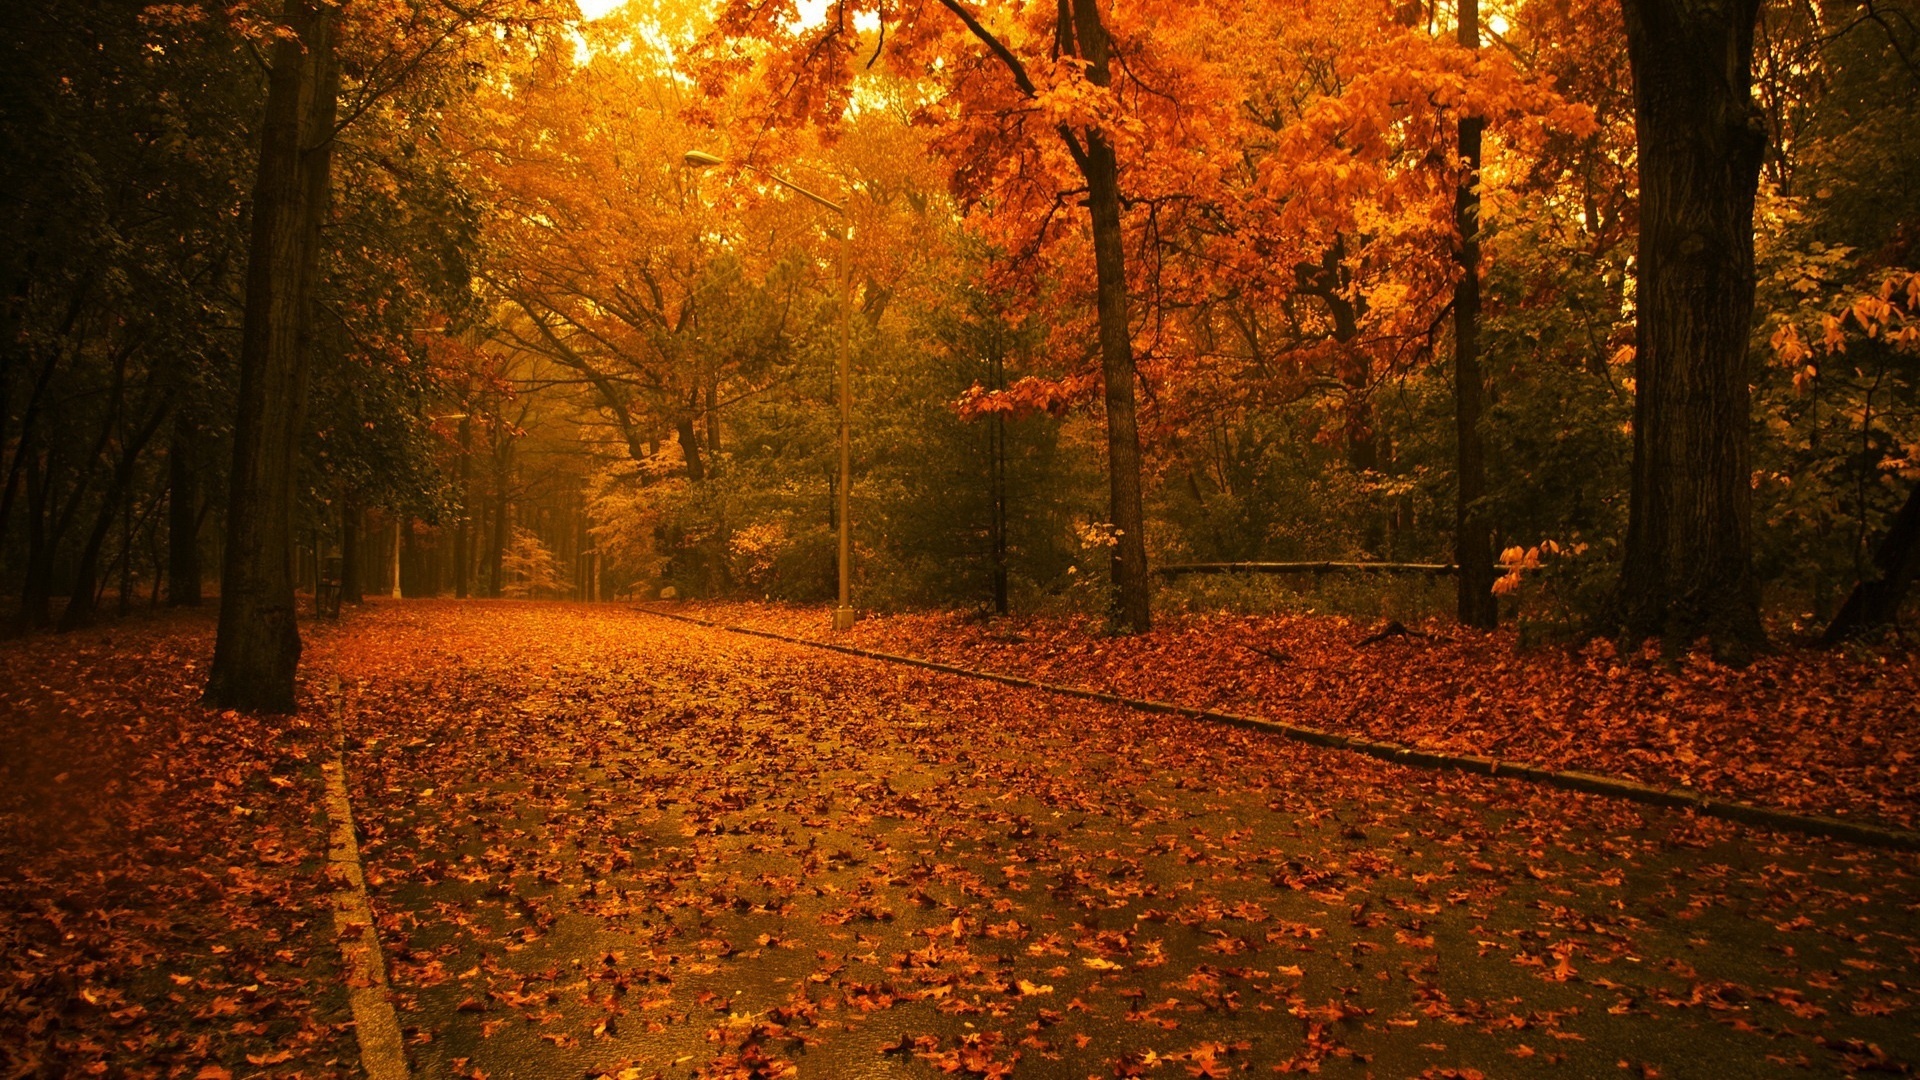 Scenery Pics Image Trees In Autumn HD Wallpaper And